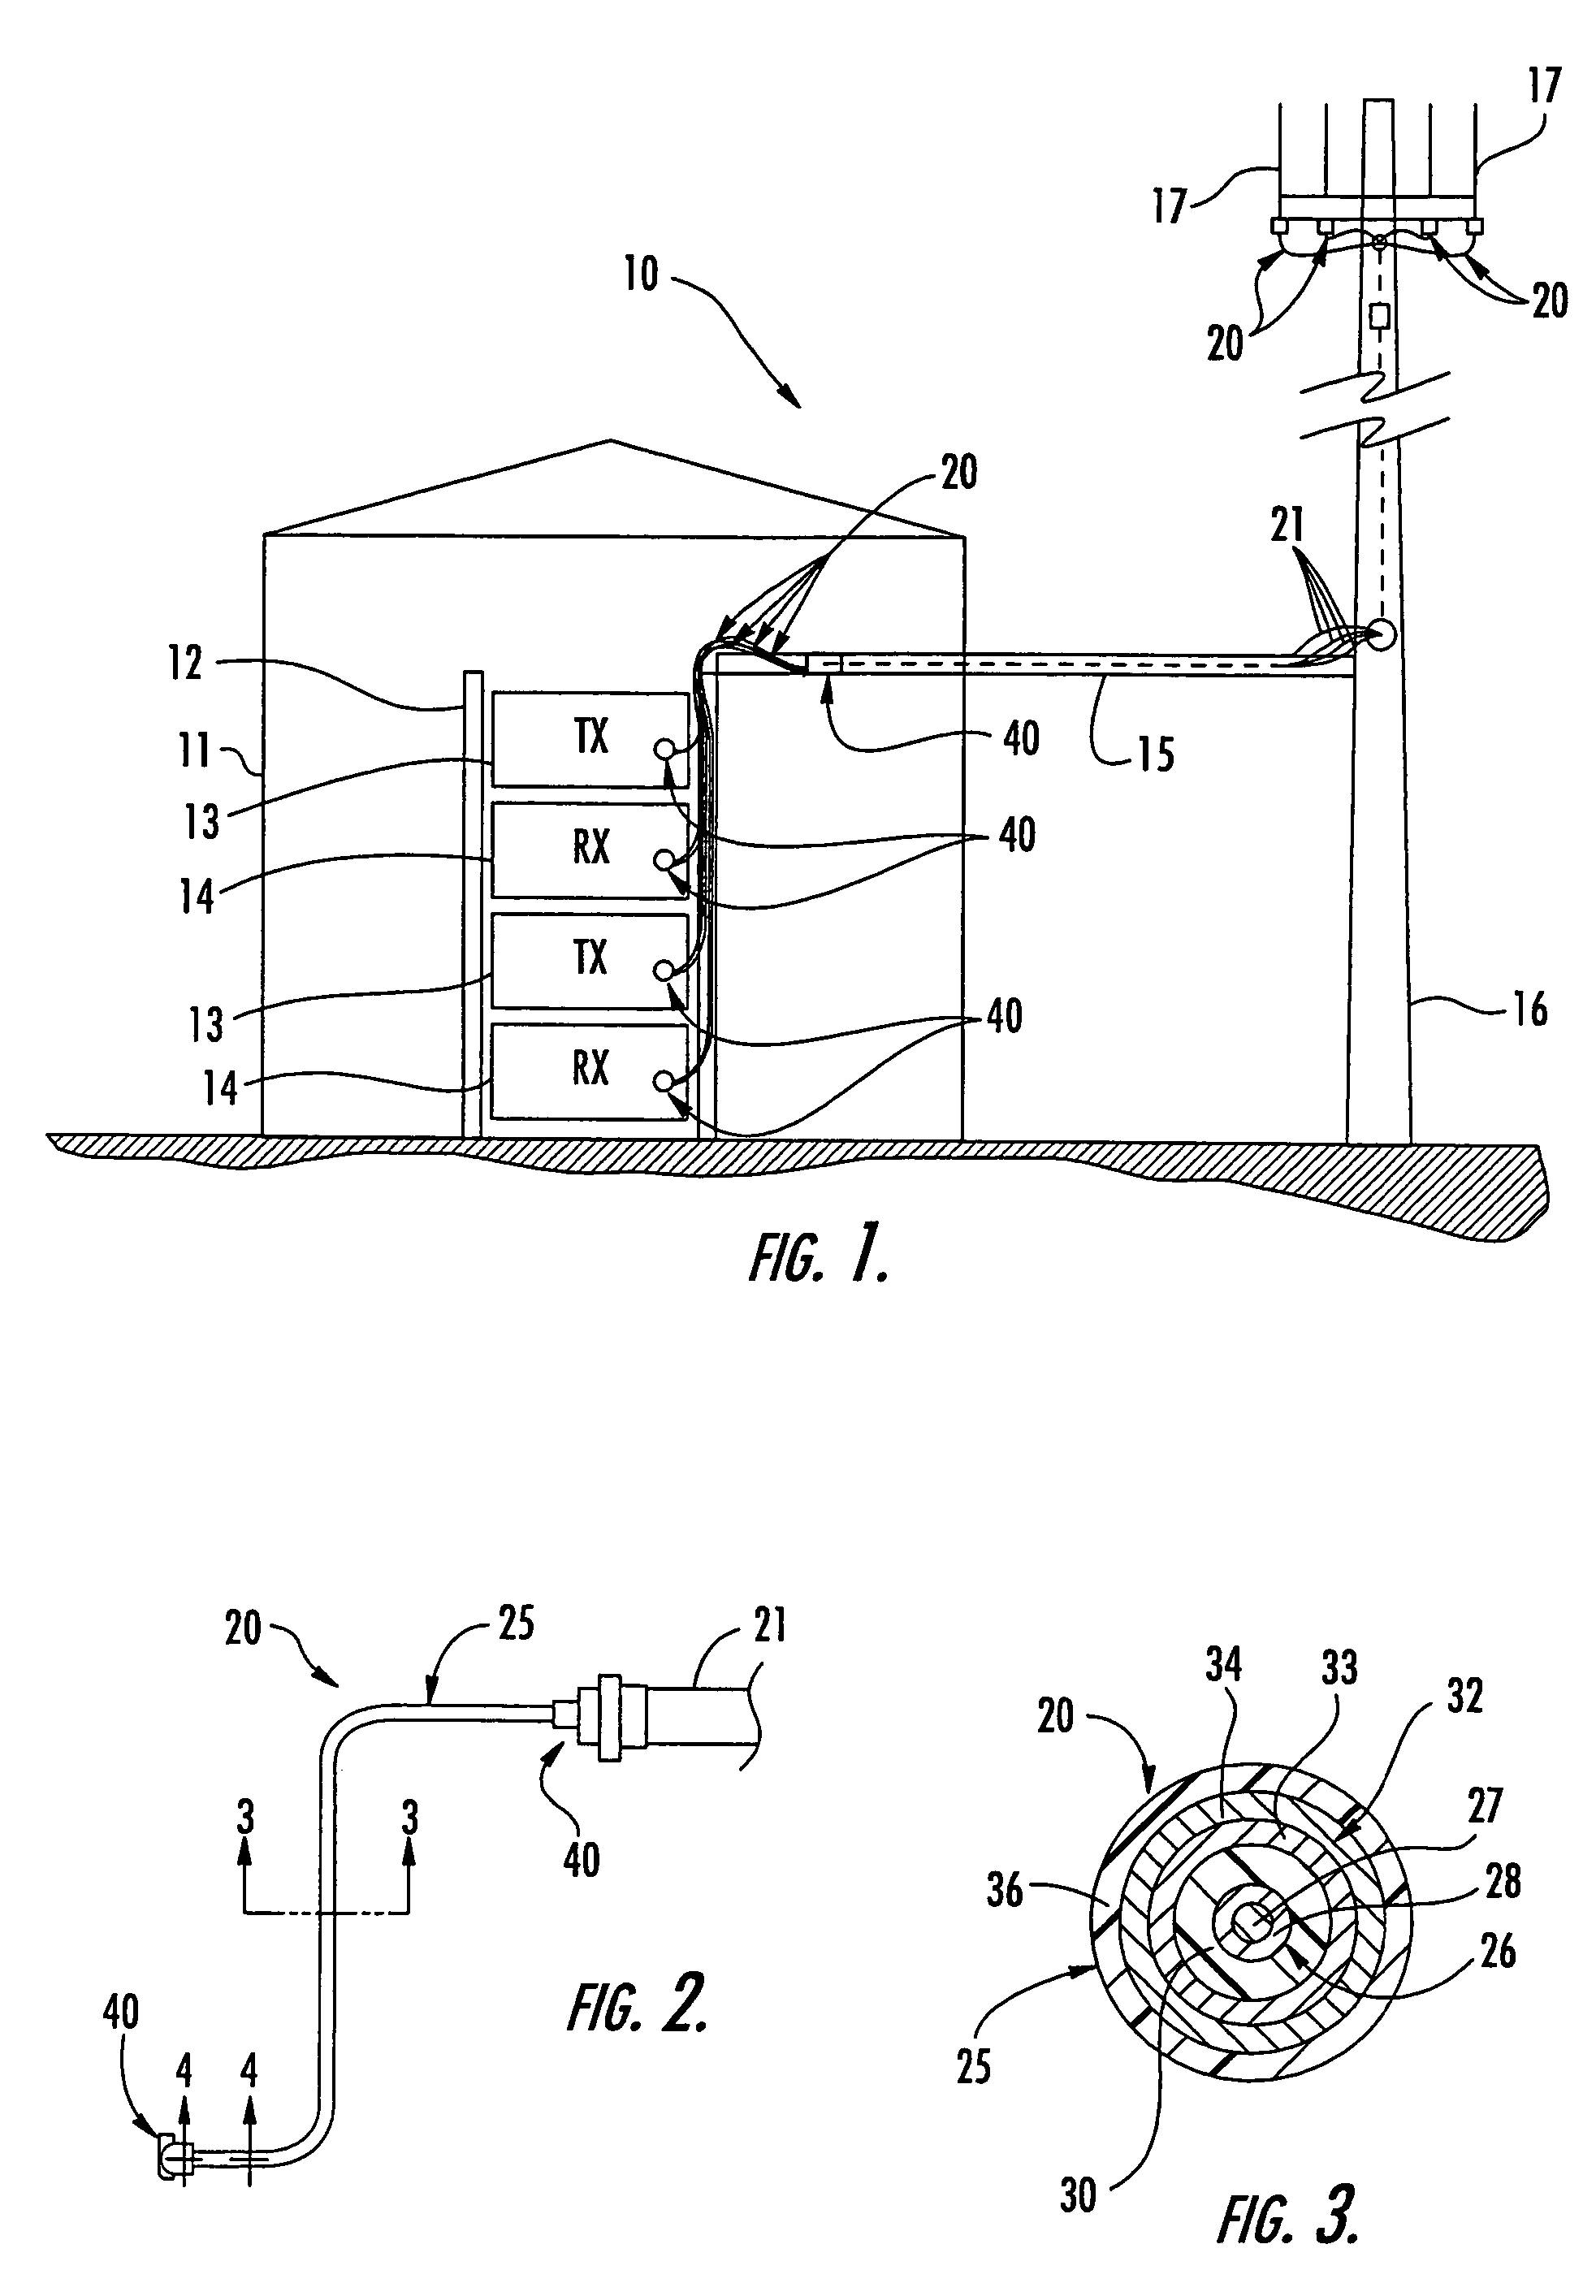 Method for marking coaxial cable jumper assembly including plated outer assembly